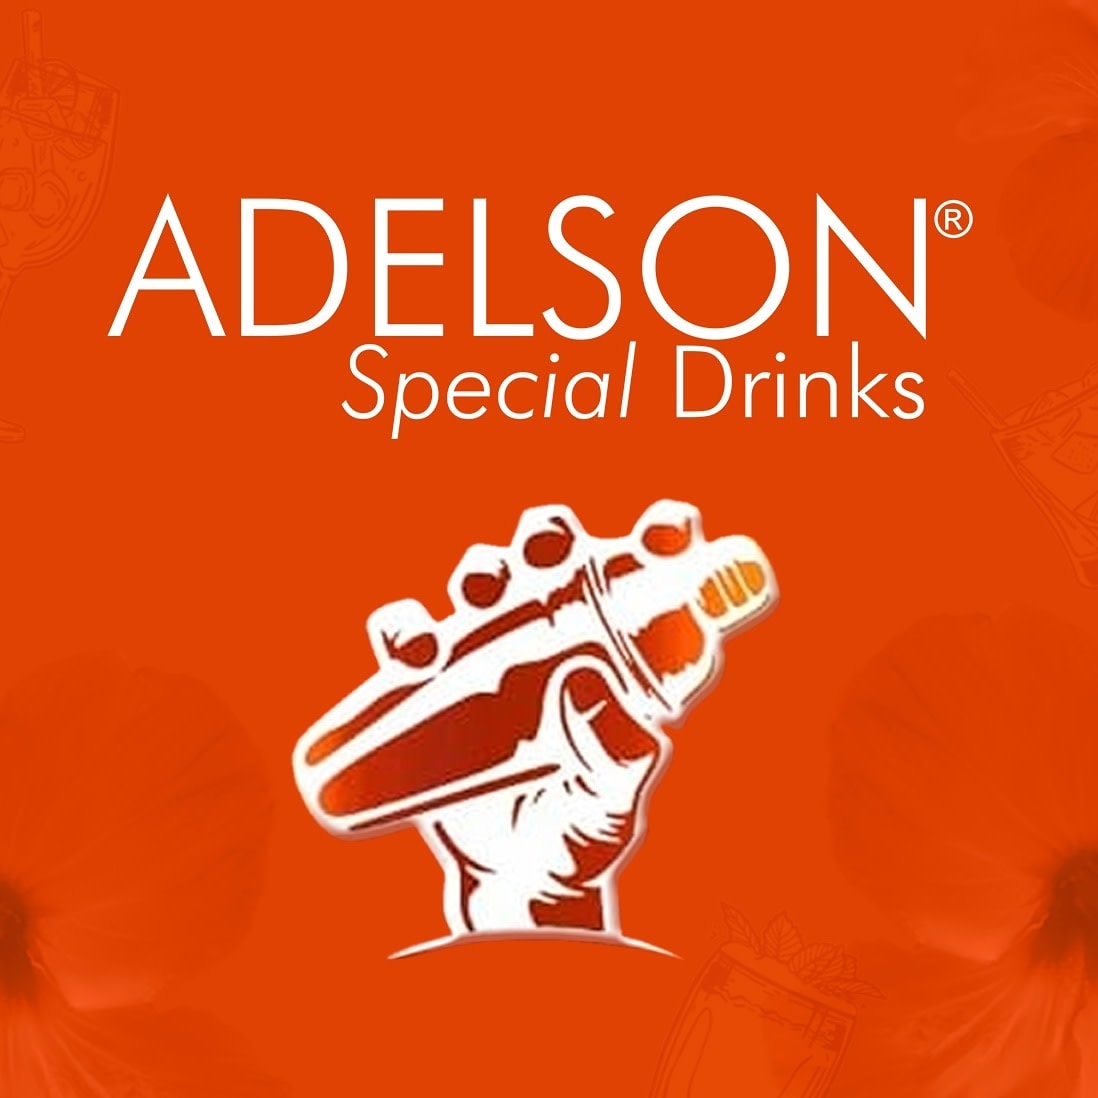 Adelson Special Drinks